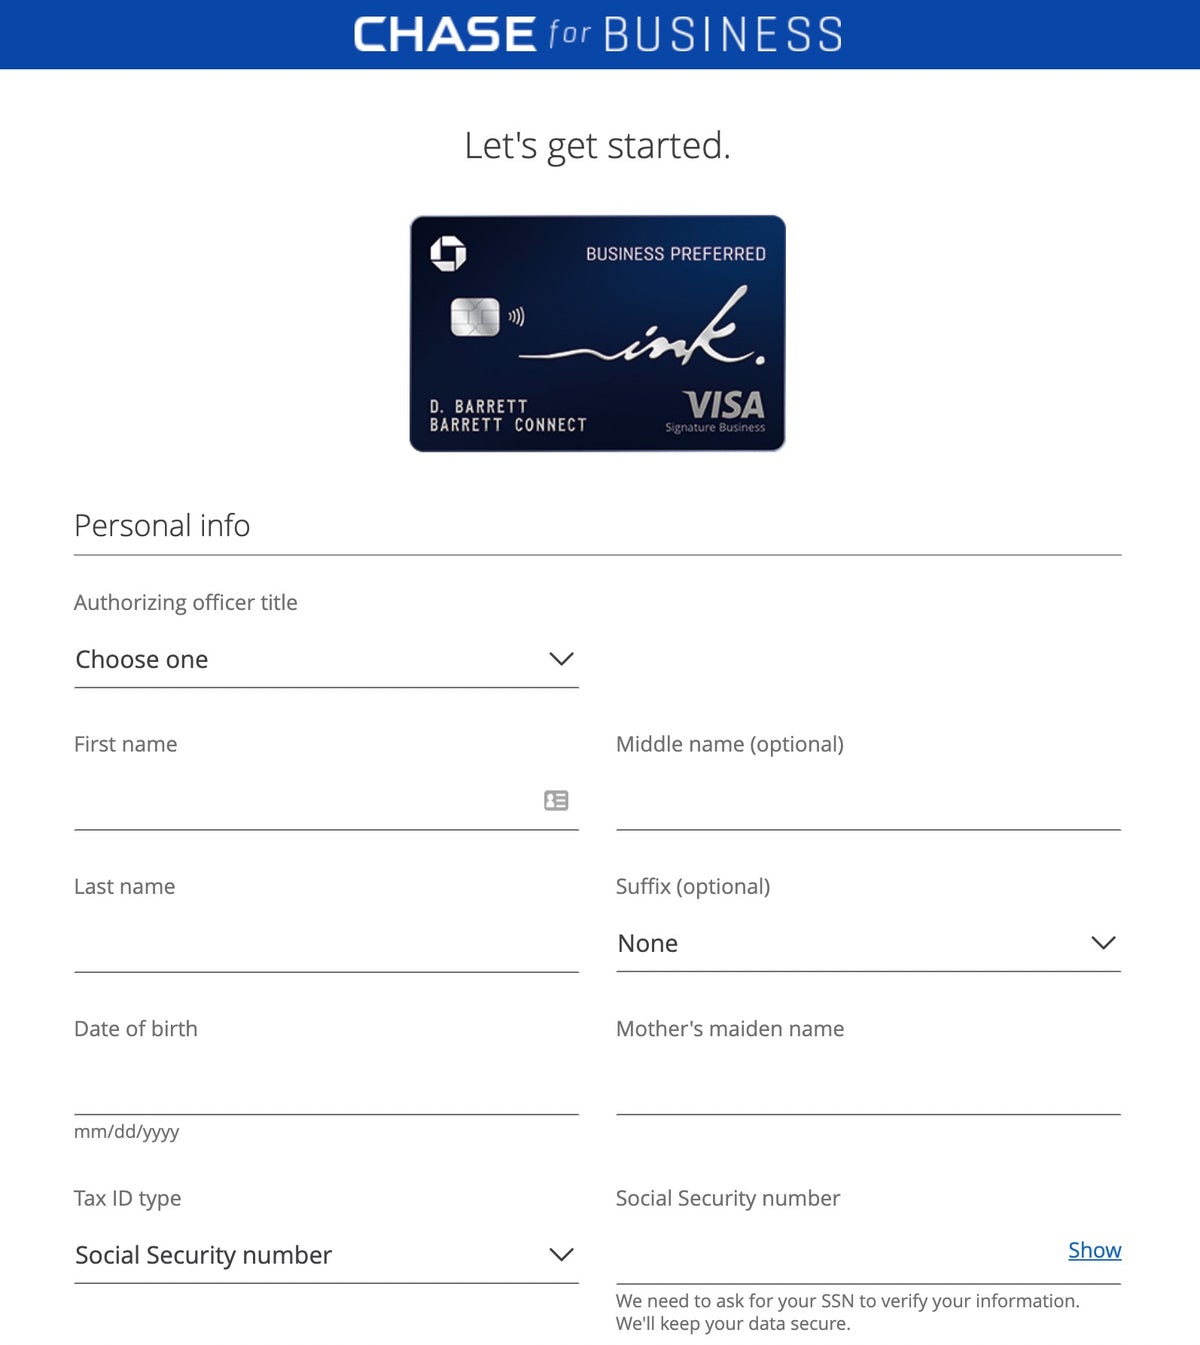 Chase Ink Application Page